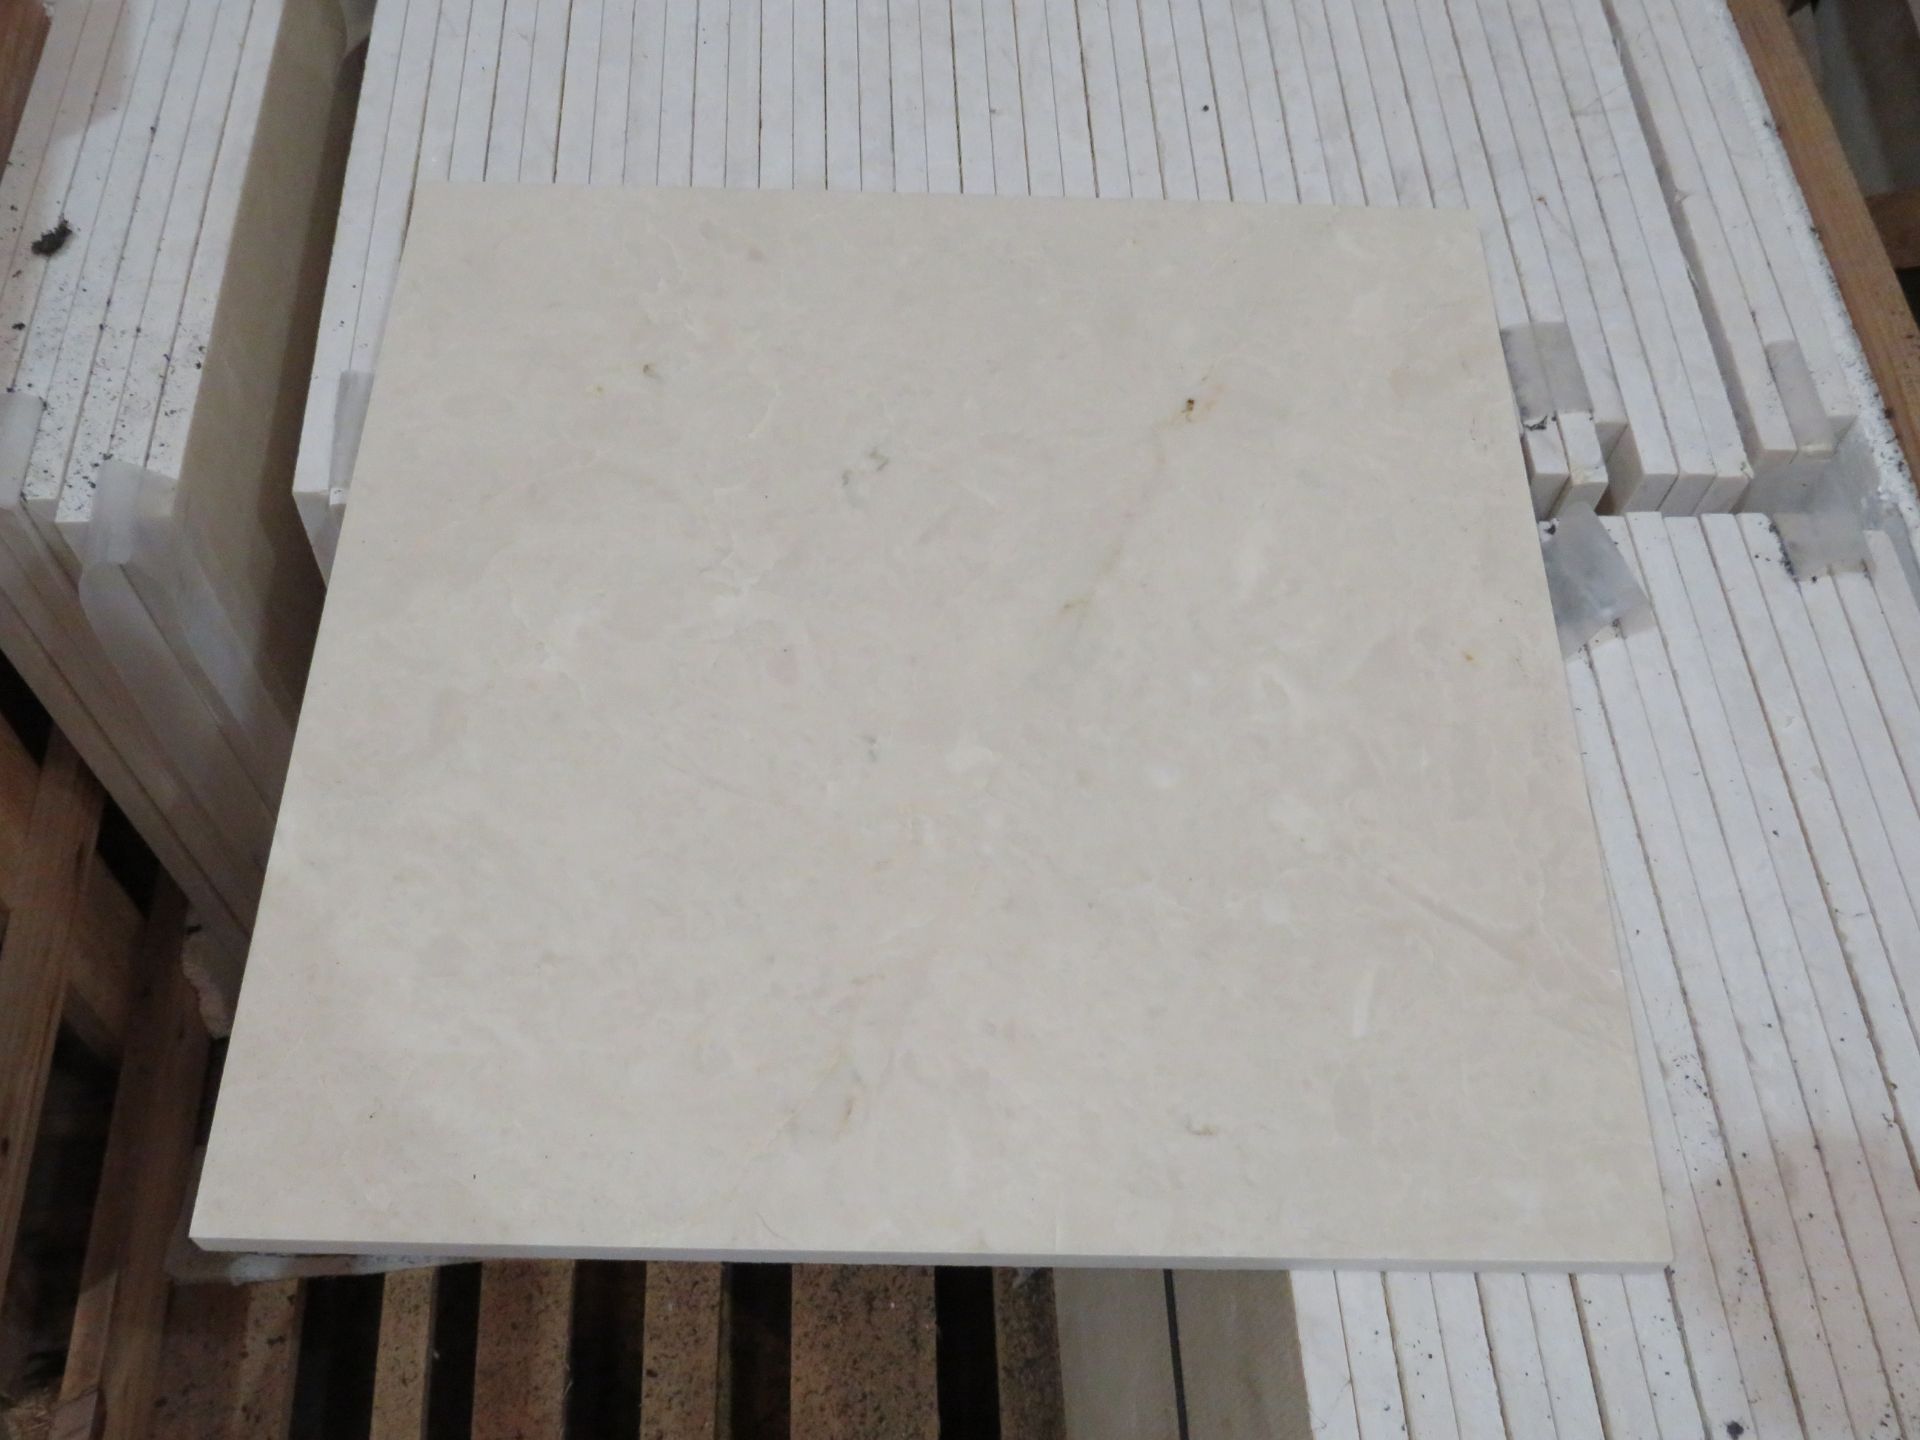 Pallet of approx 100 Beige Cystallino Rosa Polished marble tiles, 45.7x45.7cm